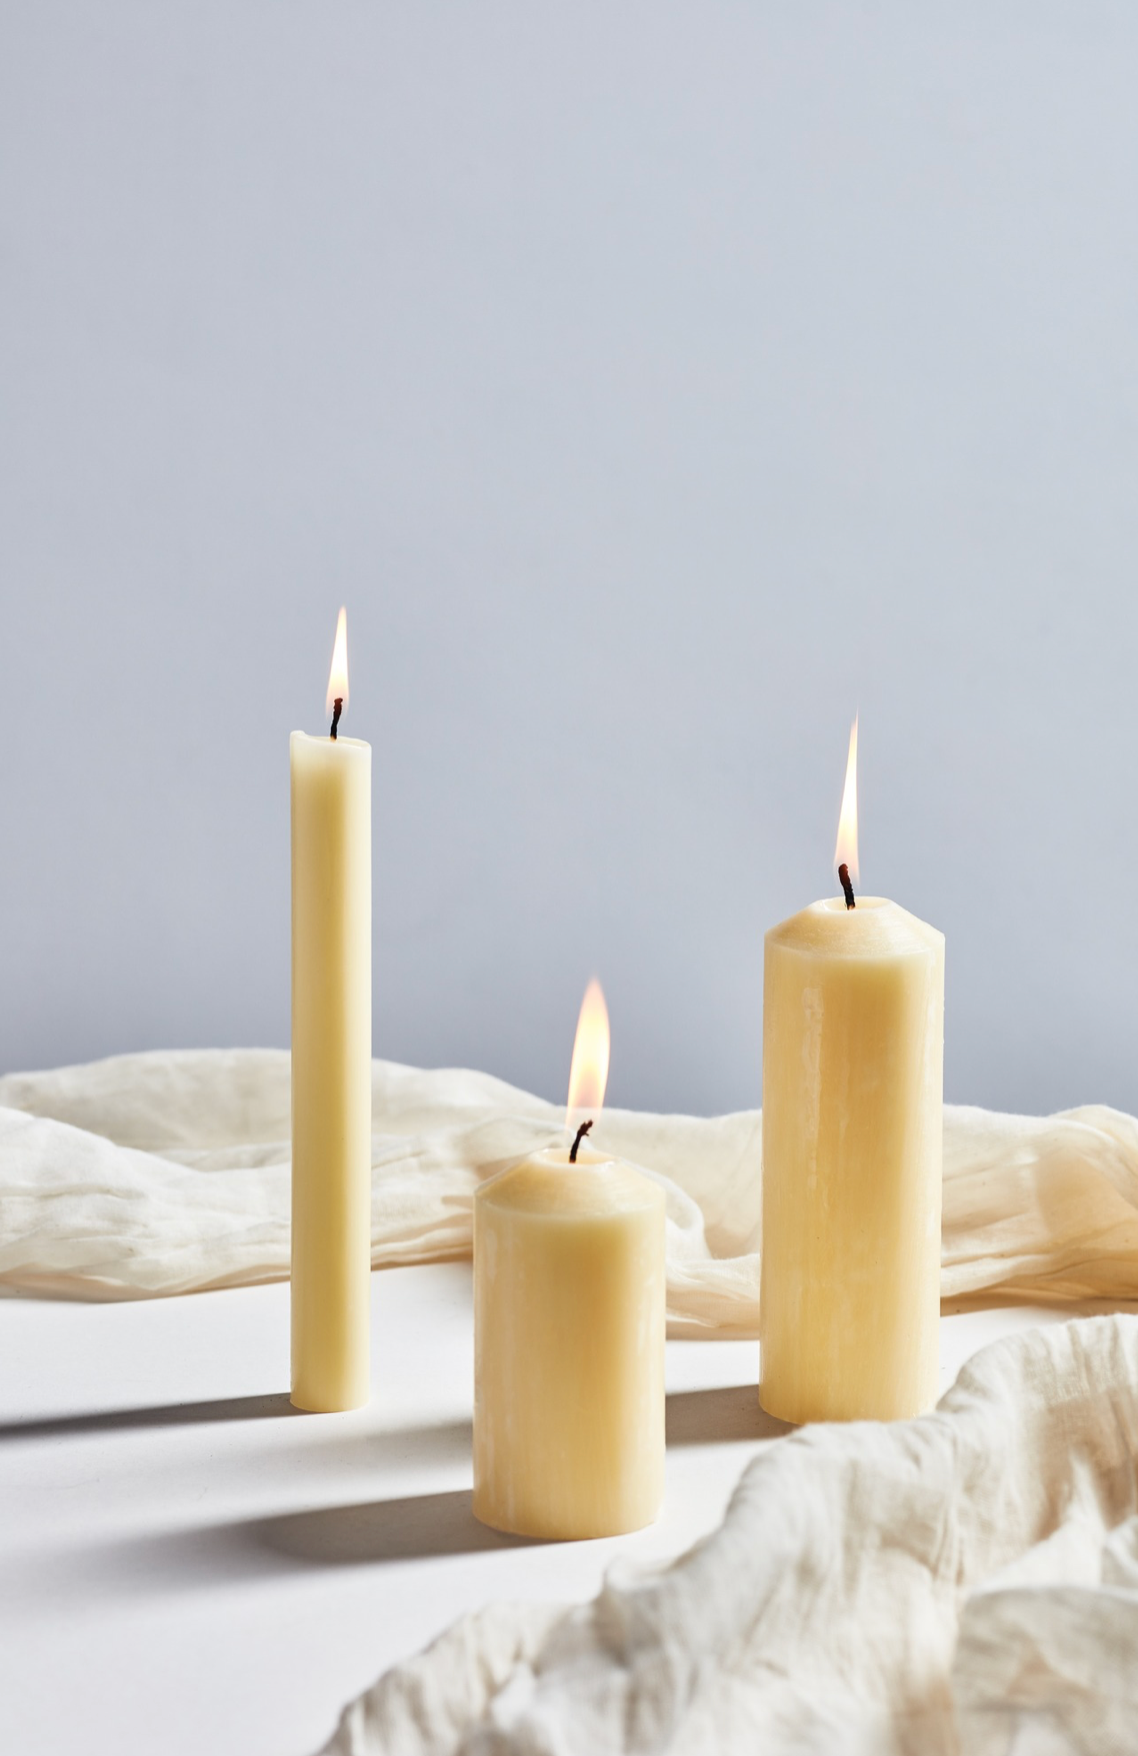 St Eval Unscented Church Pillar Candle, Ivory 10 X 20 CM